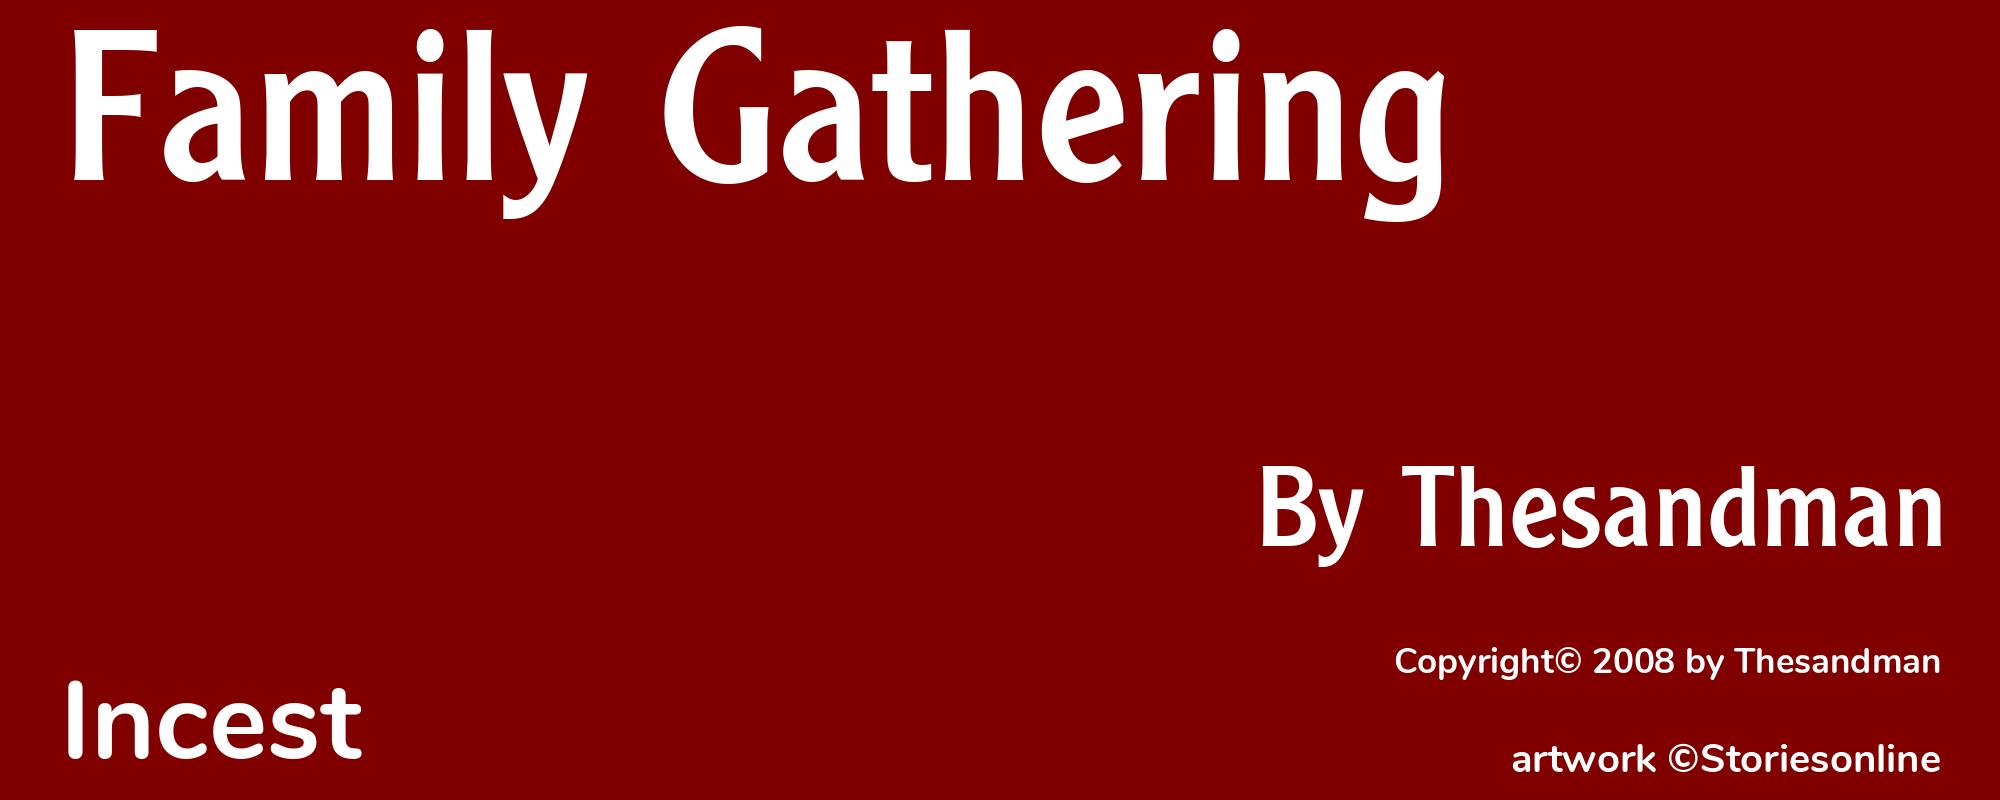 Family Gathering - Cover